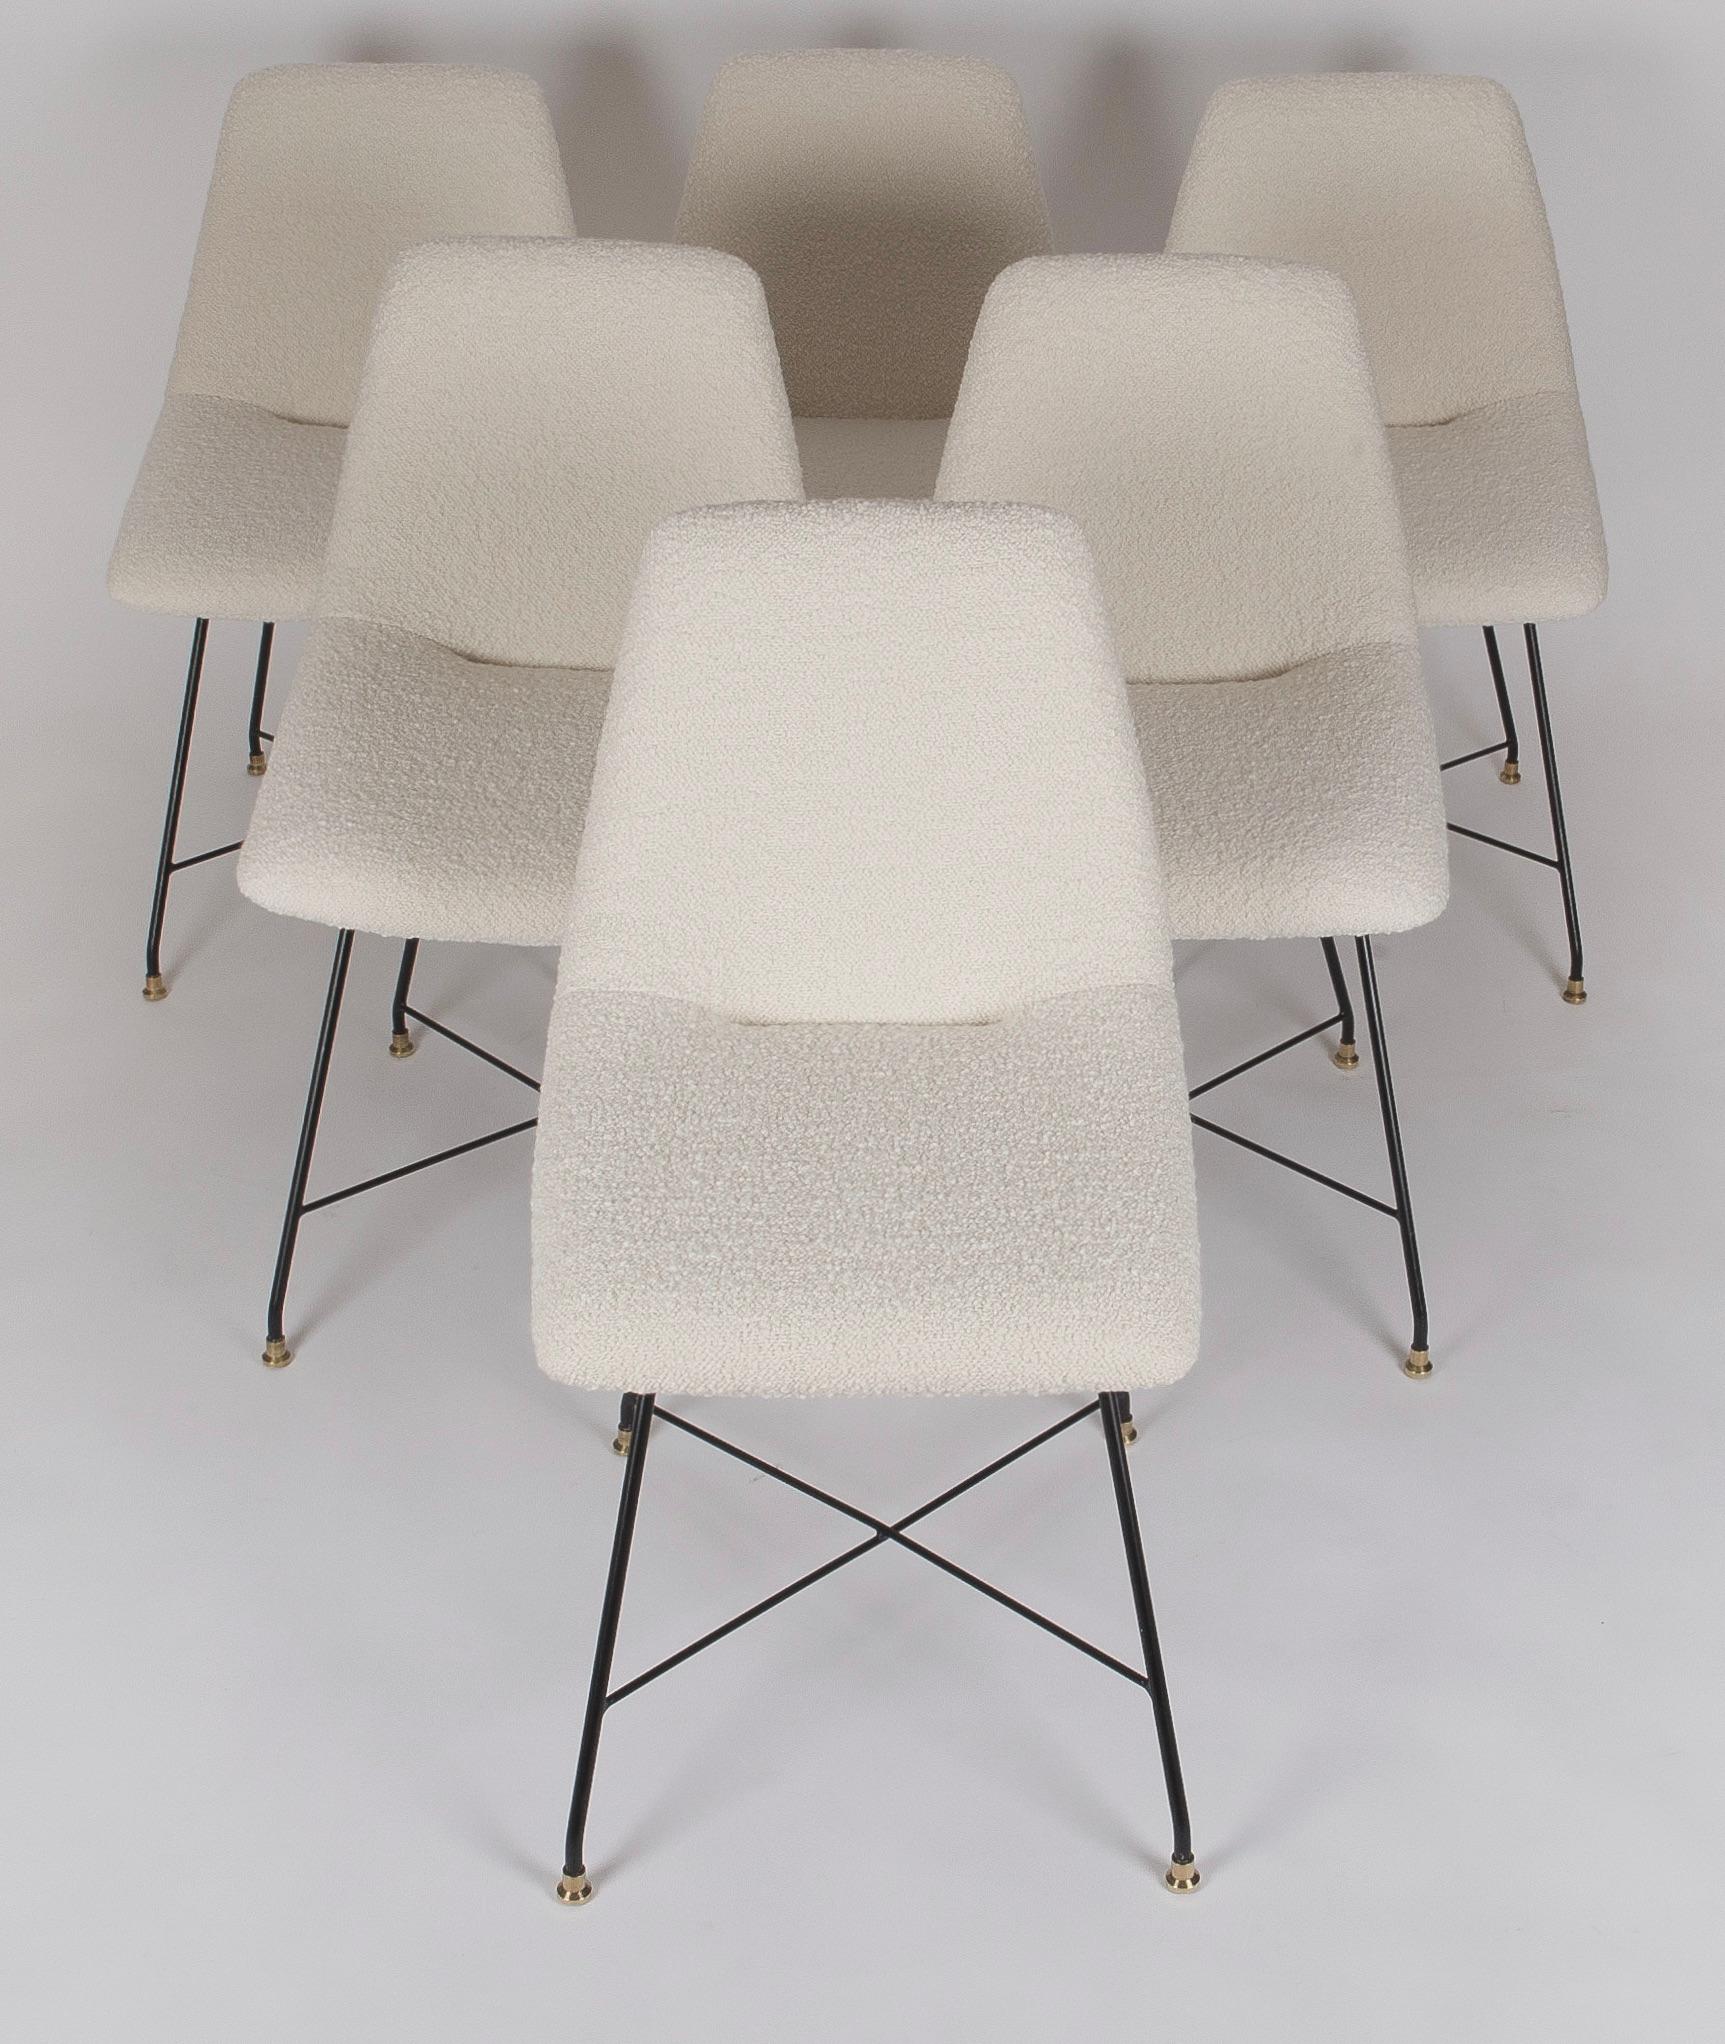 A beautiful set of six 'Aster' chairs designed by Augusto Bozzi for Fratelli Saporiti in 1956. The internal hand-made plywood frame seat has been completely restored with new foams and re-upholstered in an off-white bouclé fabric from Dedar Milano.